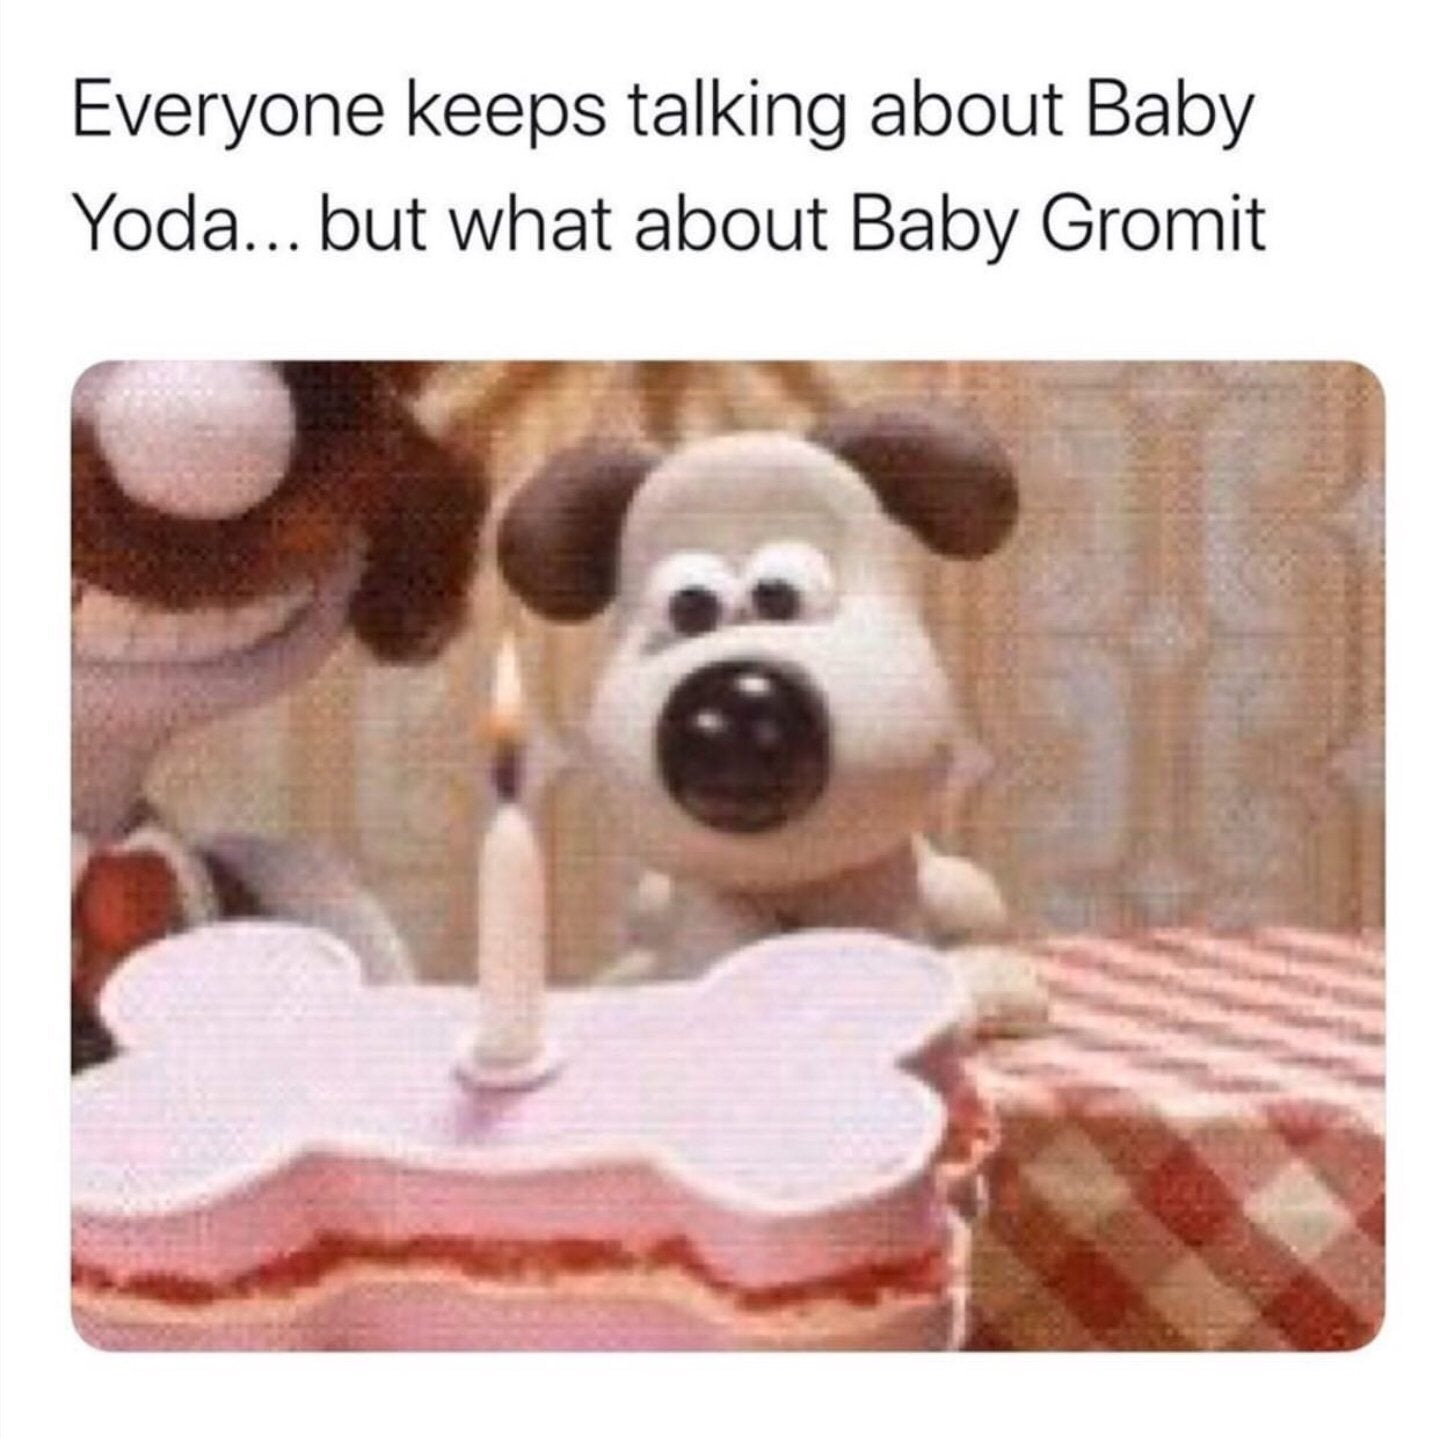 gromit as a puppy - Everyone keeps talking about Baby Yoda... but what about Baby Gromit